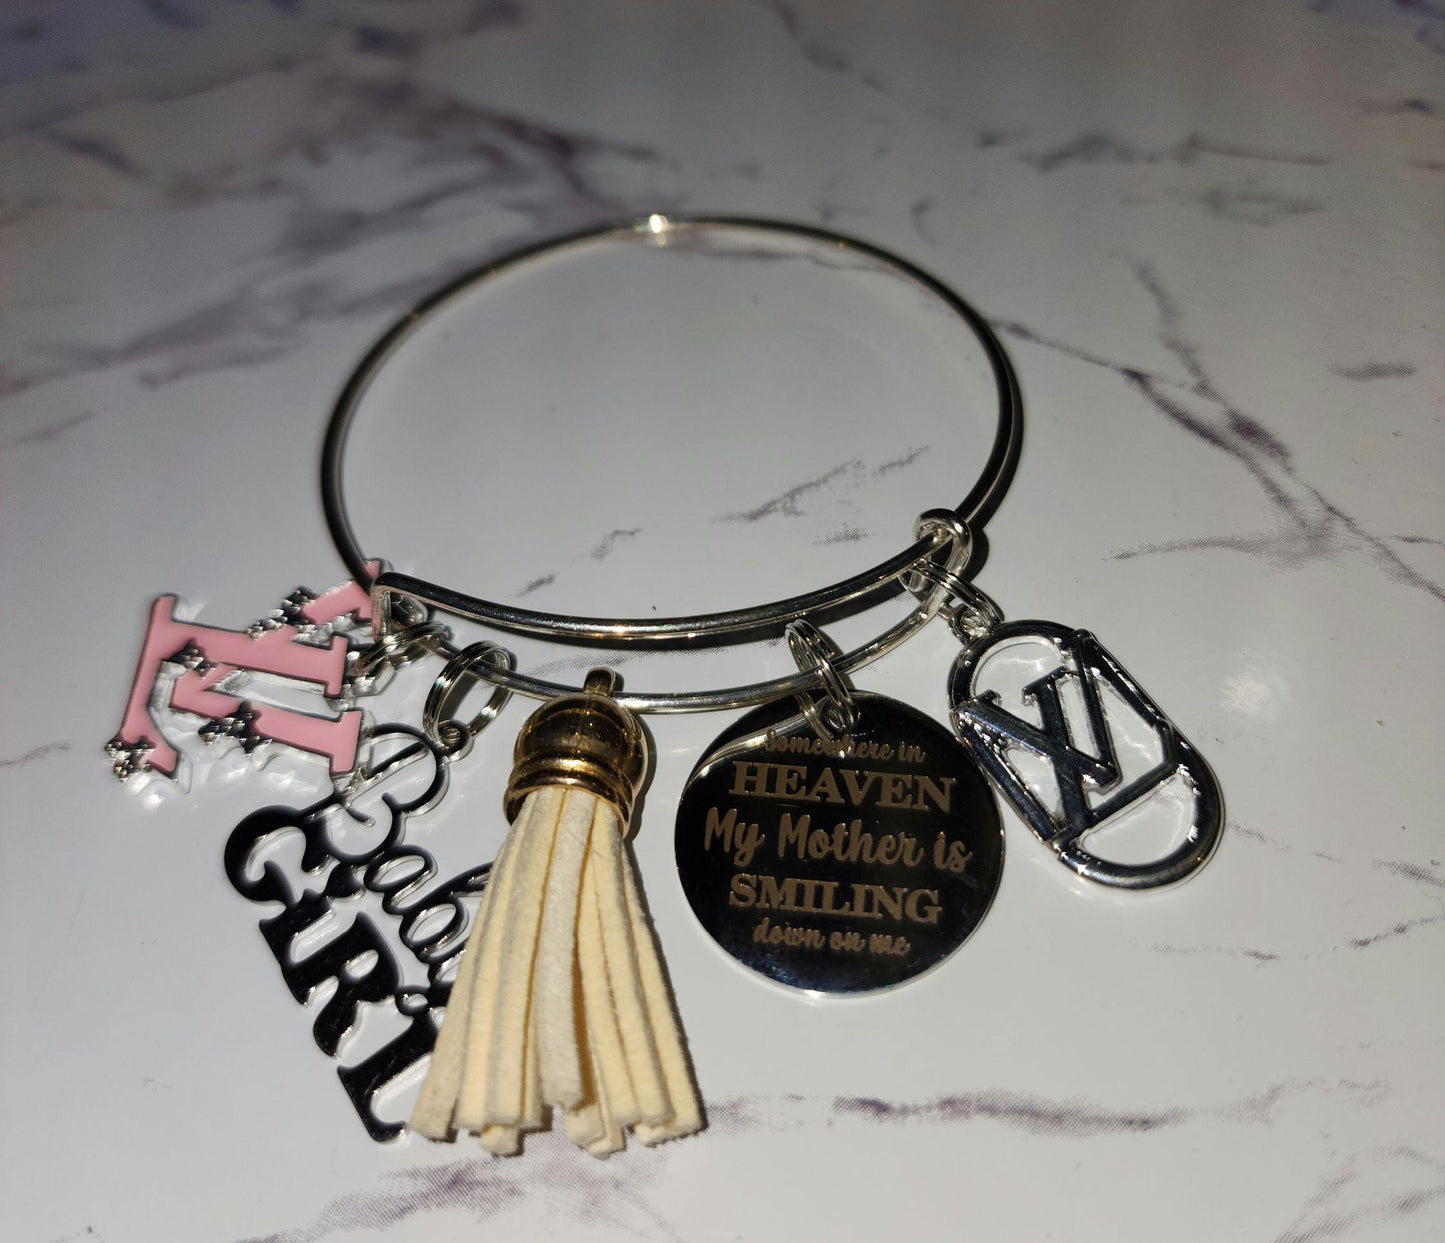 The Mom Bracelet Collection